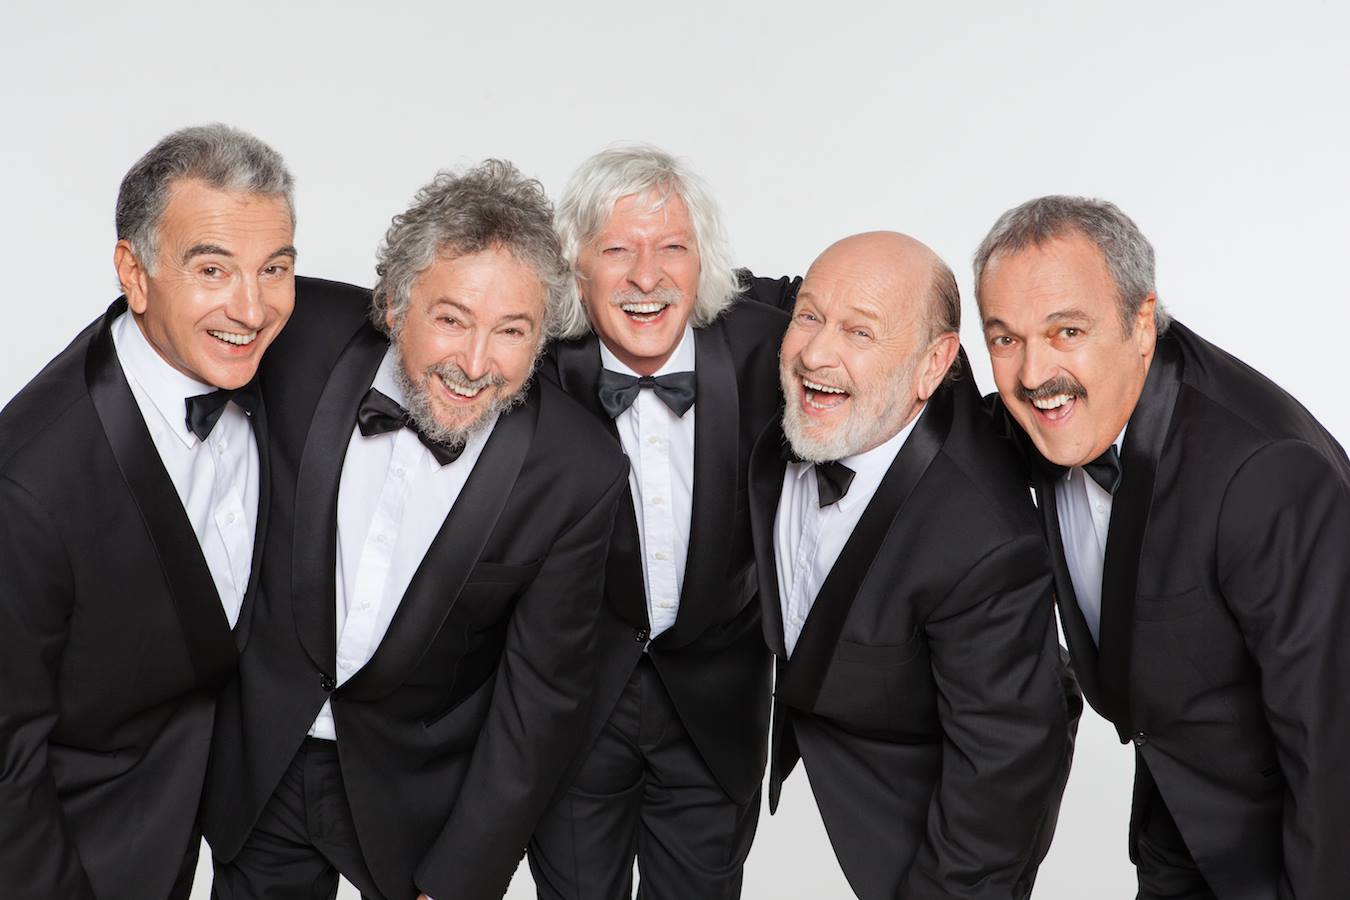 Les Luthiers Les Luthiers regresa a Costa Rica